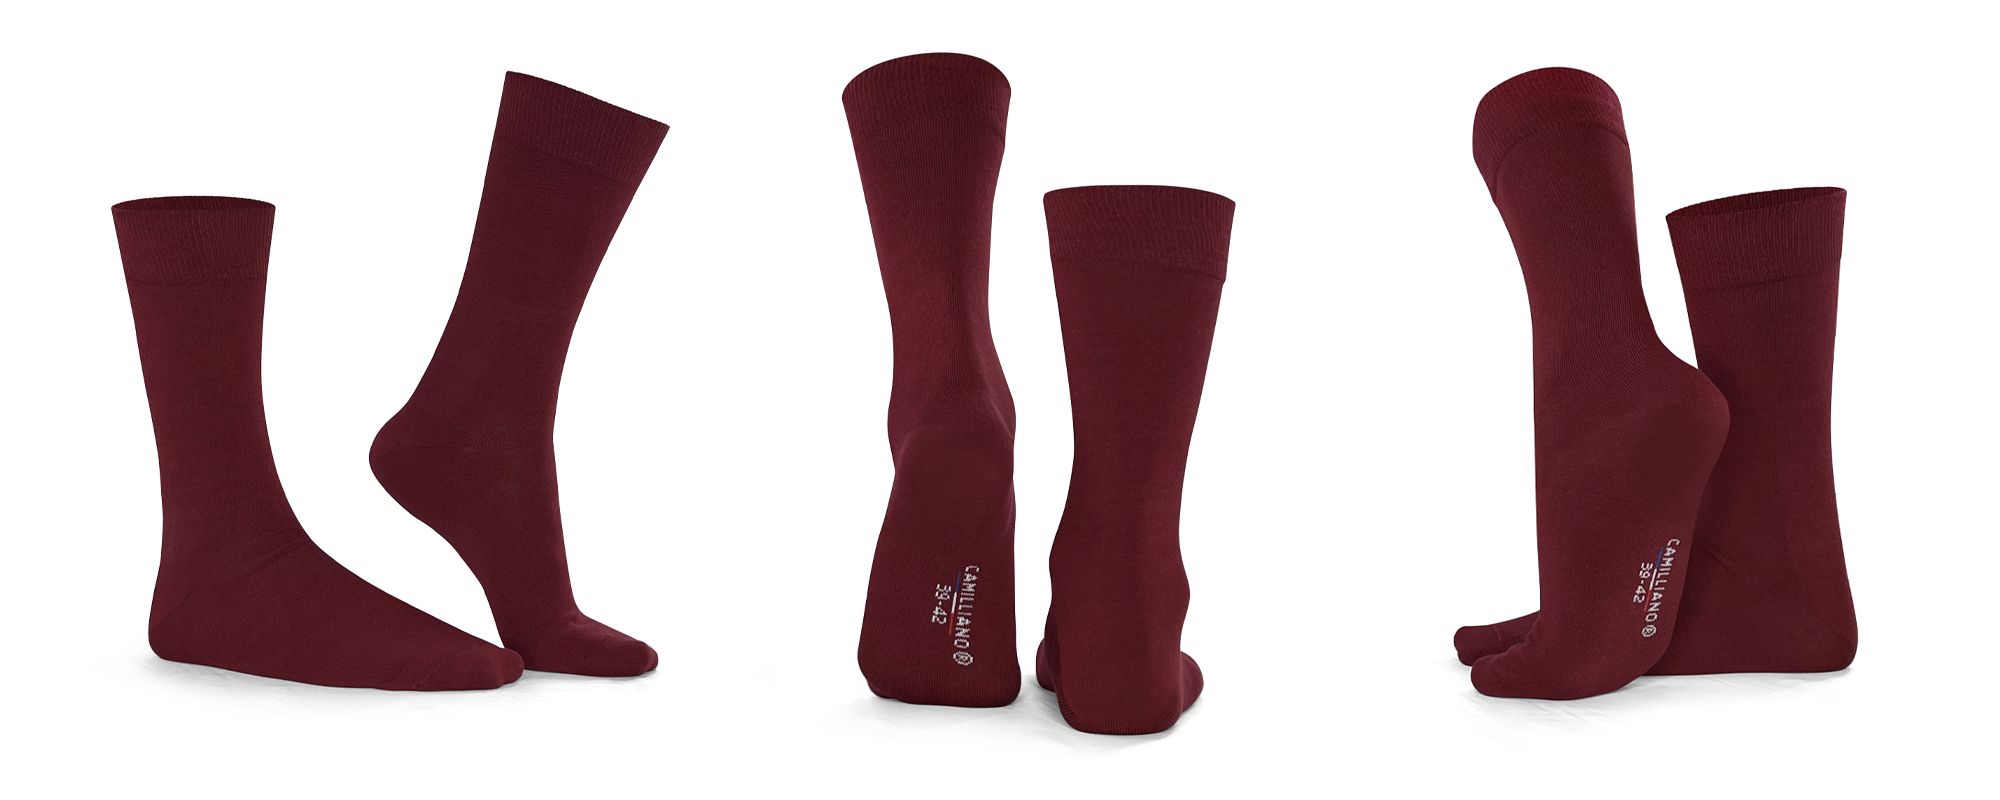 Chaussettes bordeaux hommes Coton Bio Made In France Camilliano